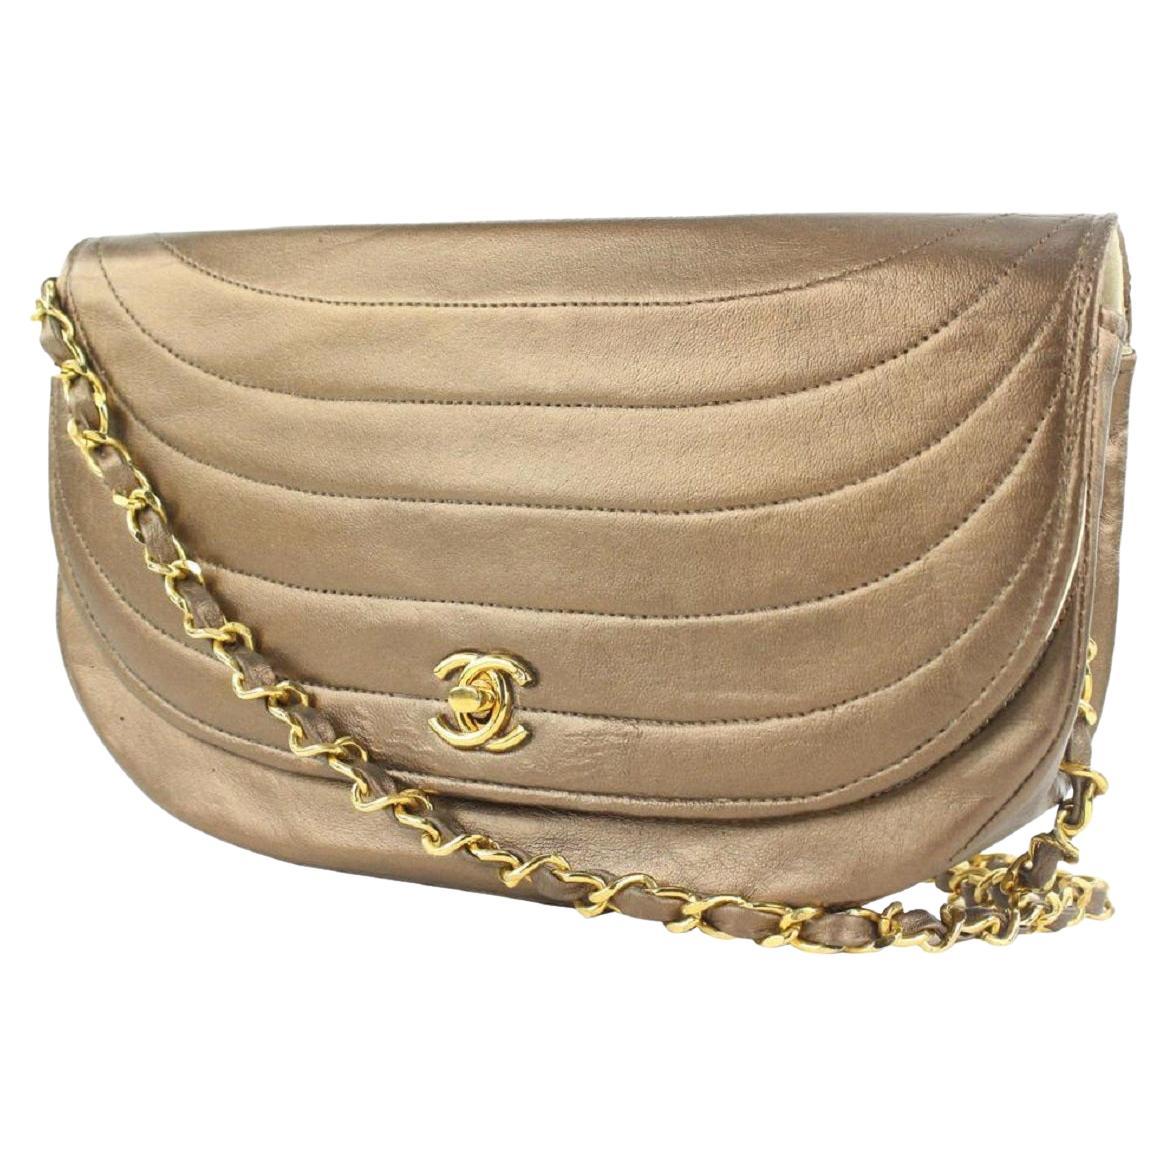 Chanel Bronze Quilted Moon Flap Chain Bag70cas423